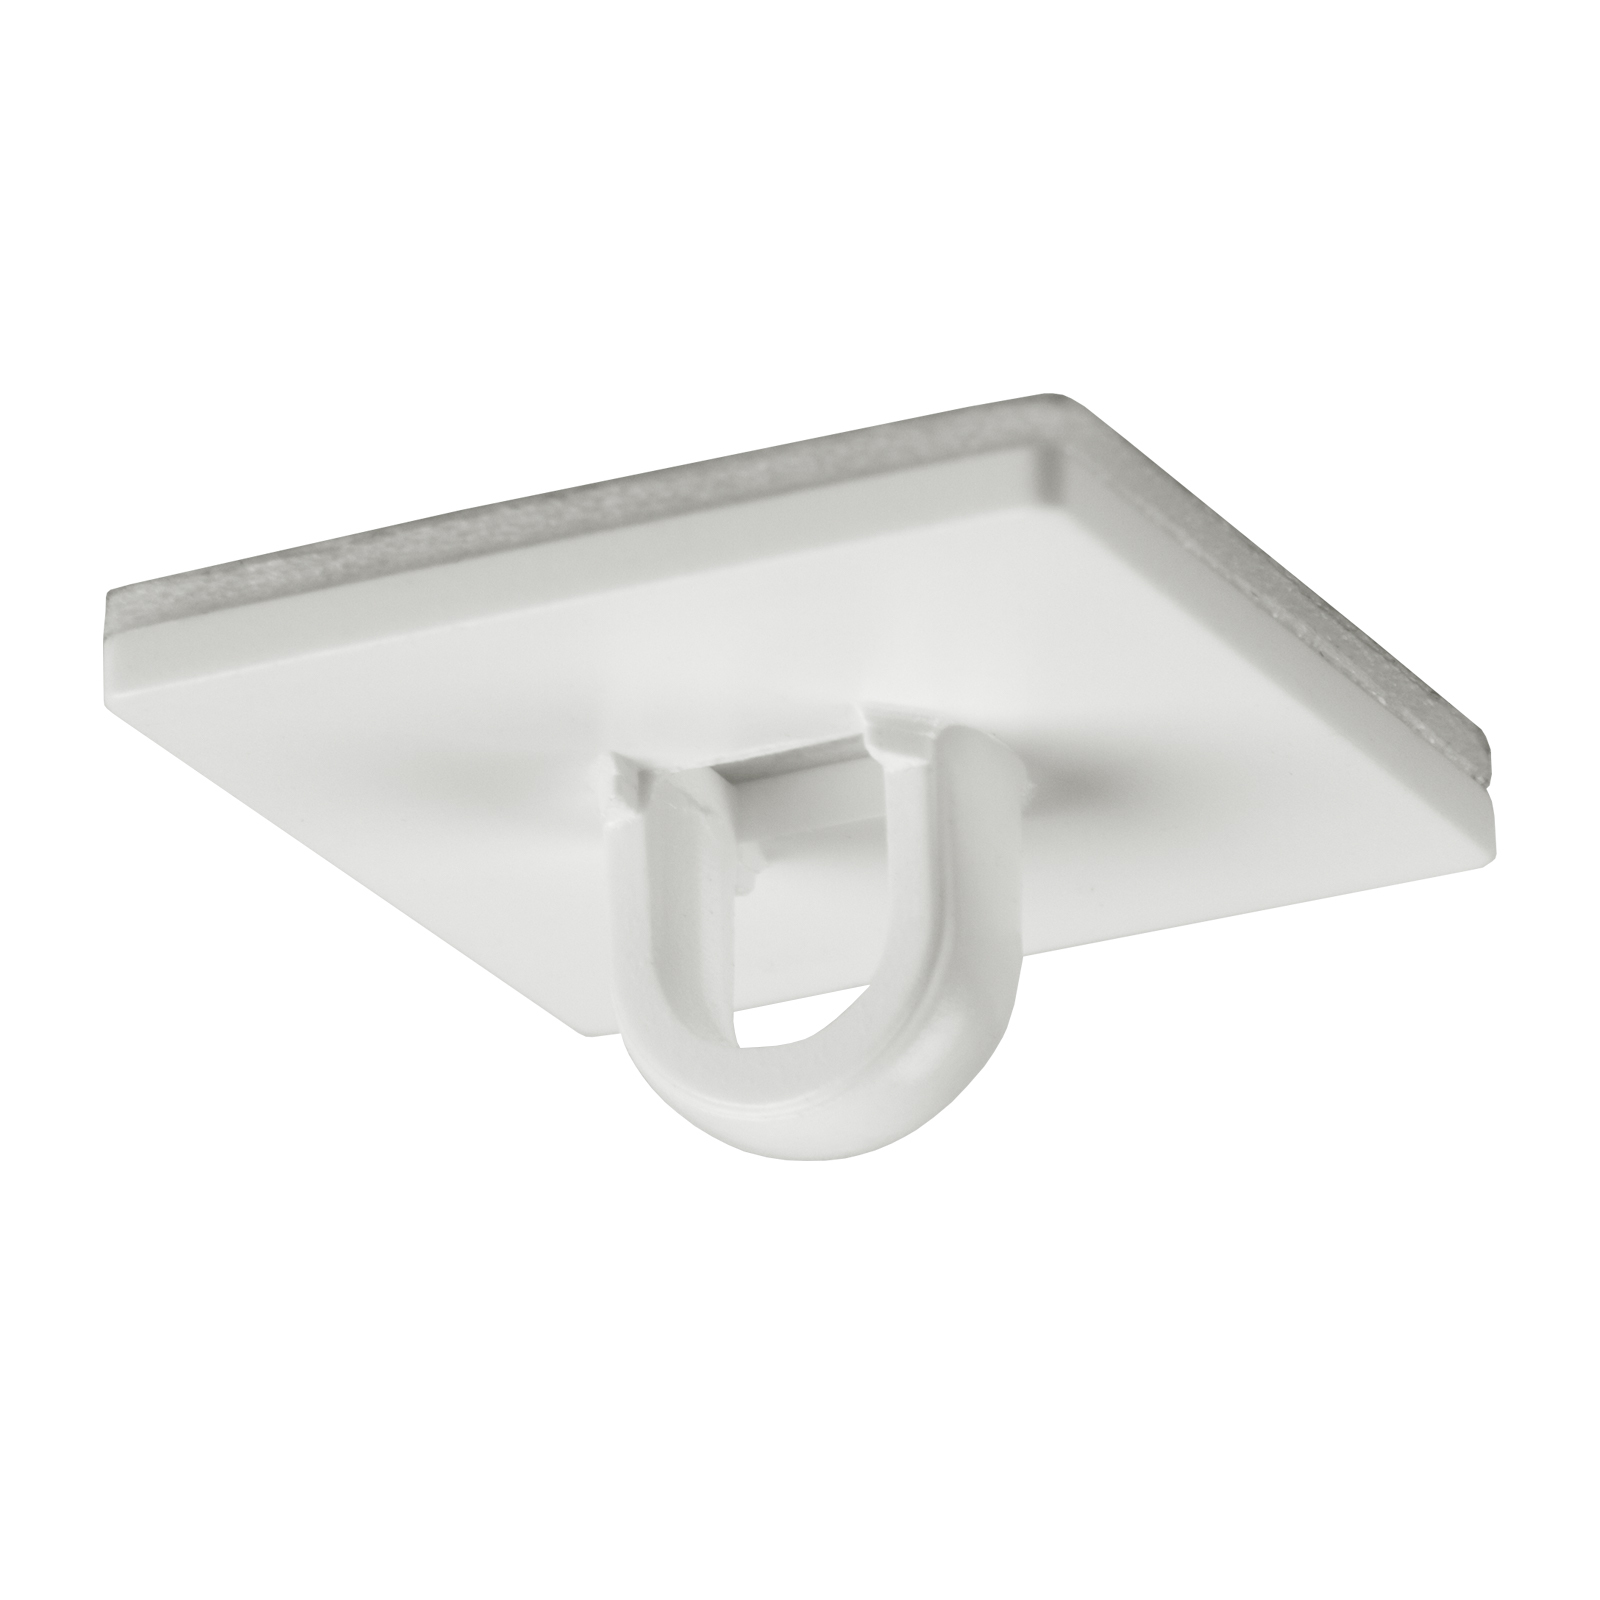 Square Hanger For Ceilings Self Adhesive 10 Pieces Ceiling